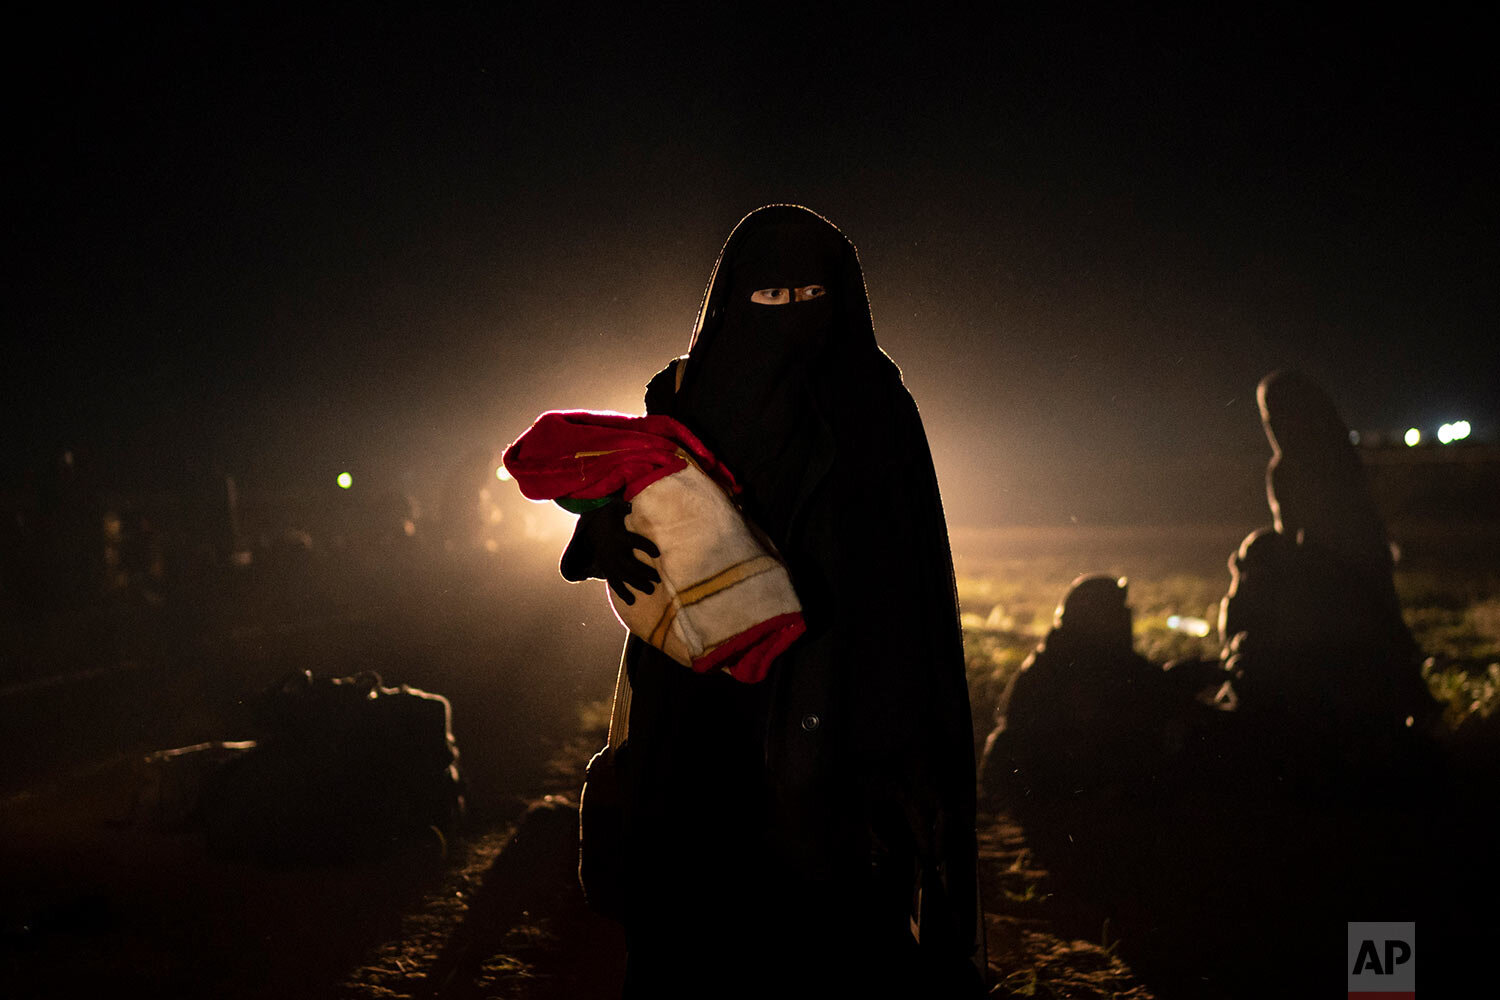  A woman and her baby, who were evacuated from the last territory held by Islamic State militants, walk after being screened by U.S.-backed Syrian Democratic Forces (SDF) in the desert outside Baghouz, Syria, on Feb. 25, 2019. (AP Photo/Felipe Dana) 